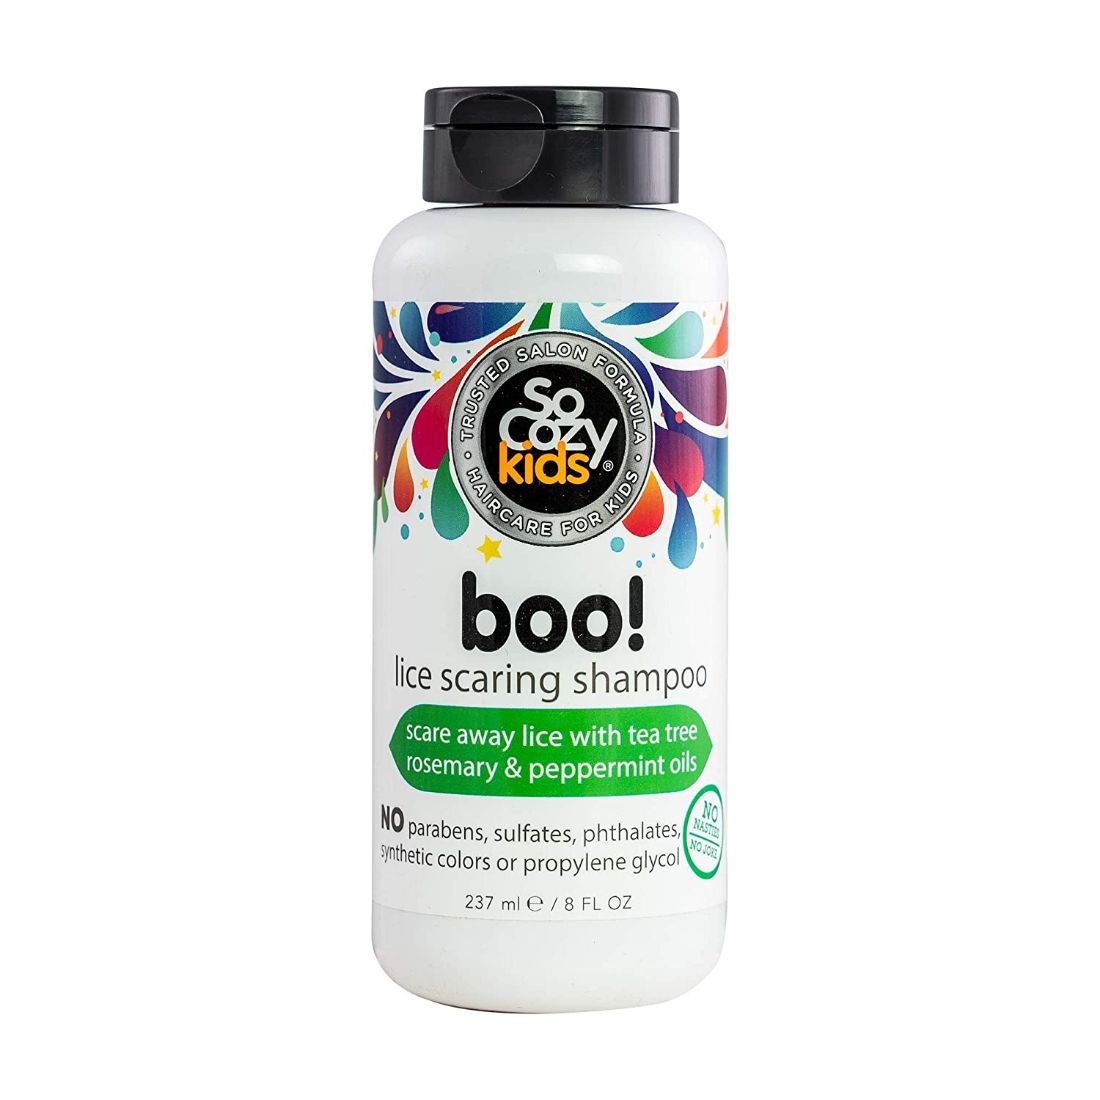 SoCozy Boo! Lice Scaring Shampoo For Kids Hair Scare Away Lice With Tea Tree Oil and Rosemary